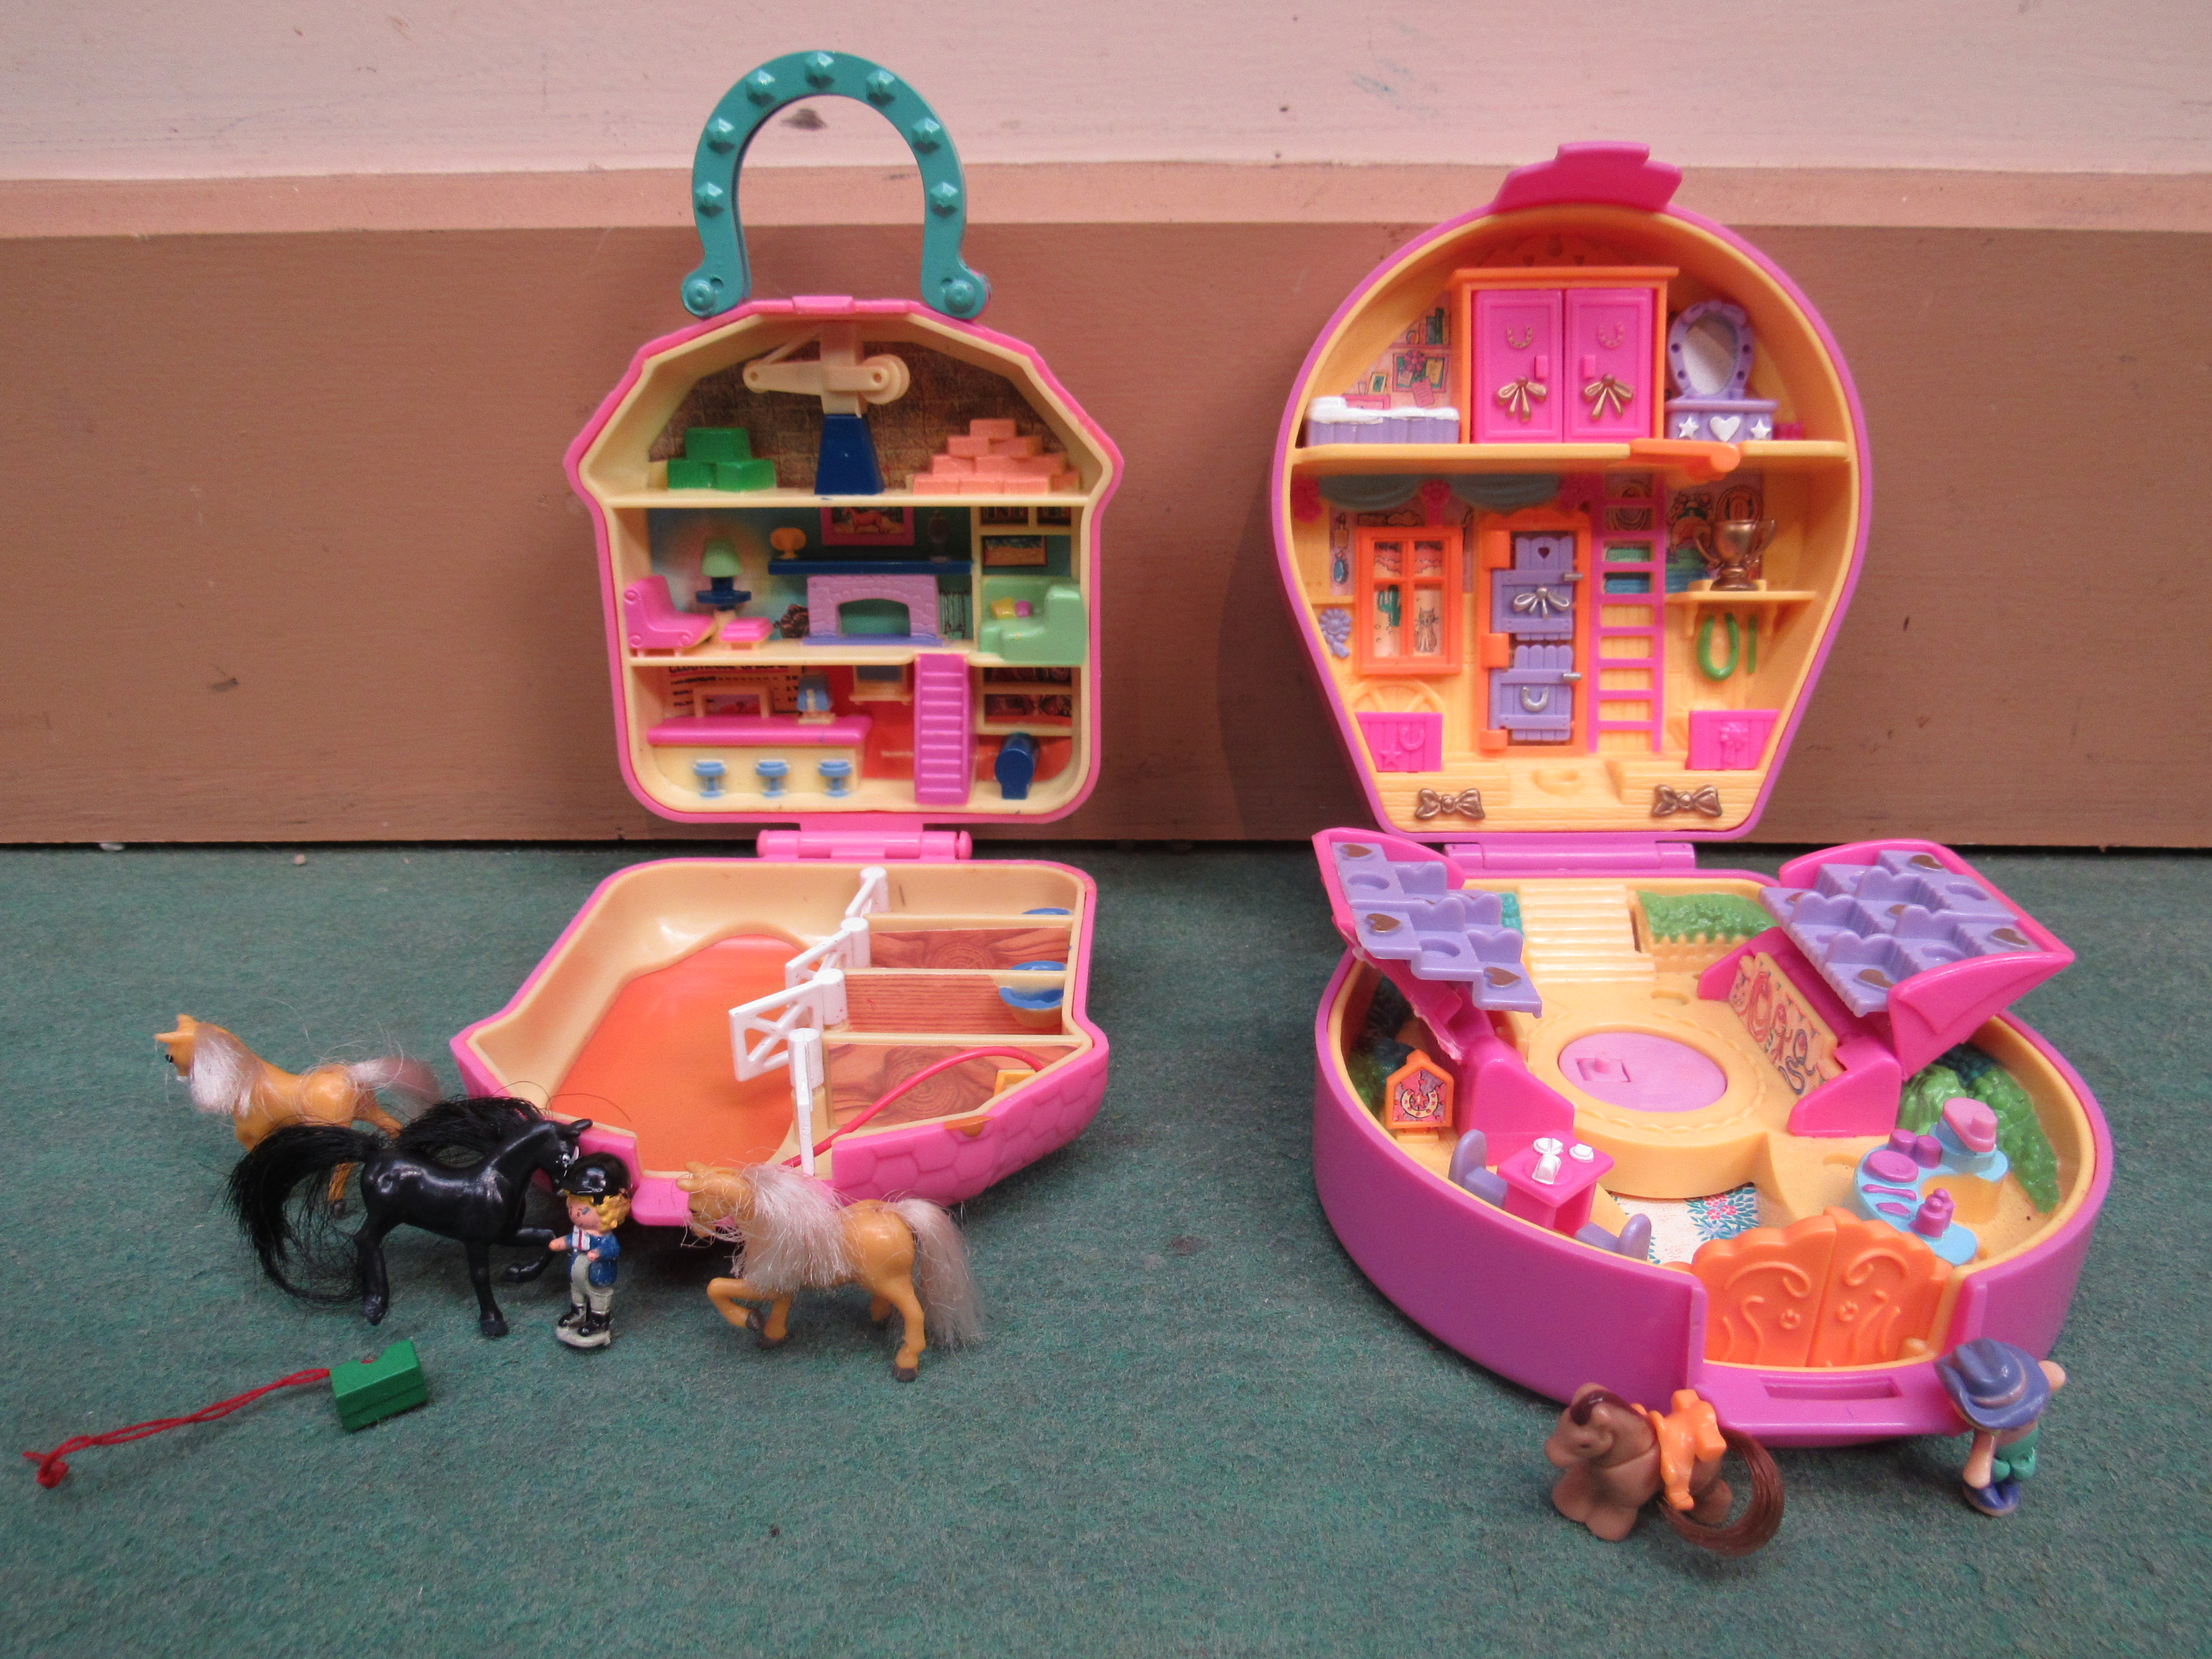 A Bluebird Toys Polly Pocket Polly's Pony Show playset with doll, pony and trophy